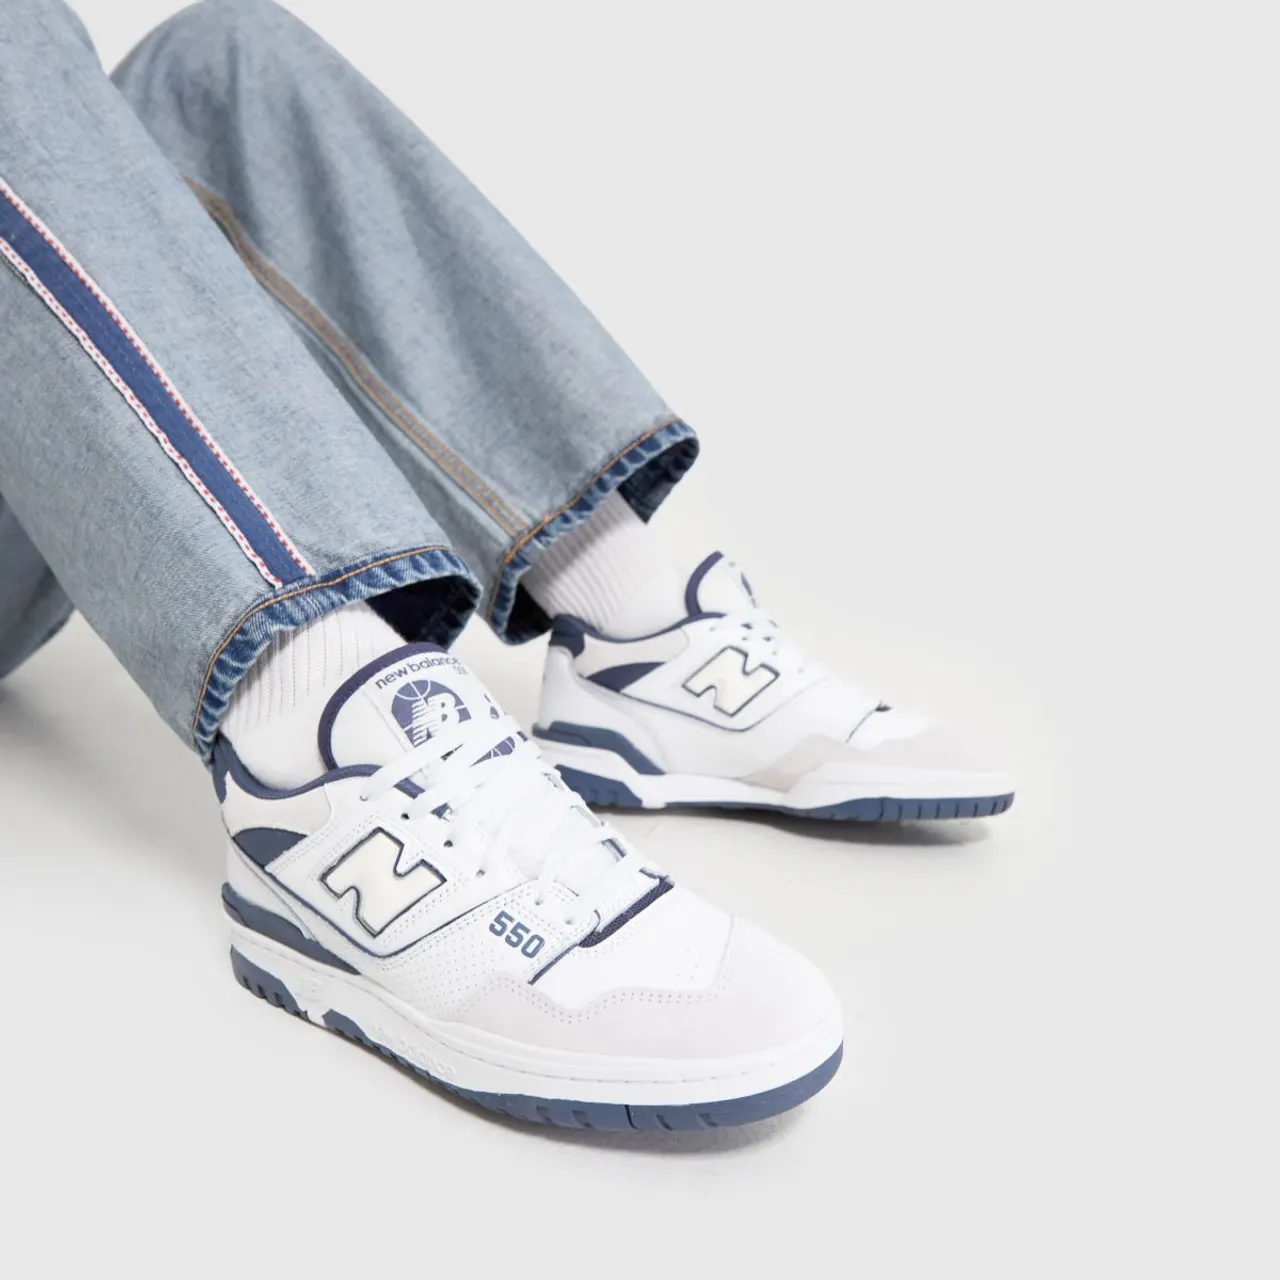 New Balance 550 Trainers In White & Blue